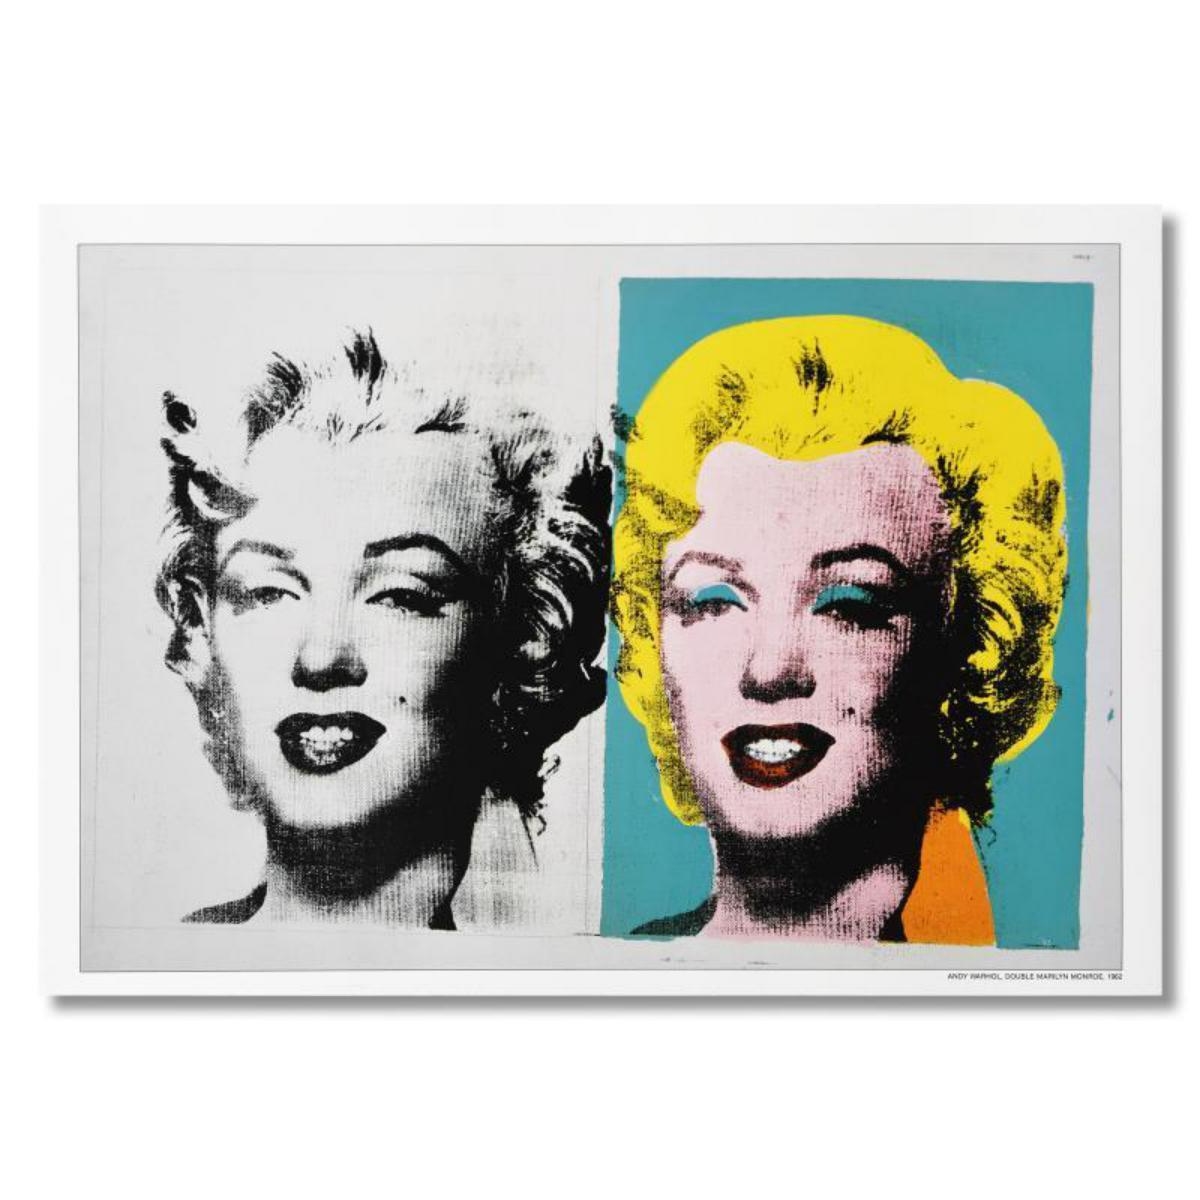 "Double Marilyn" by Andy Warhol, 1962